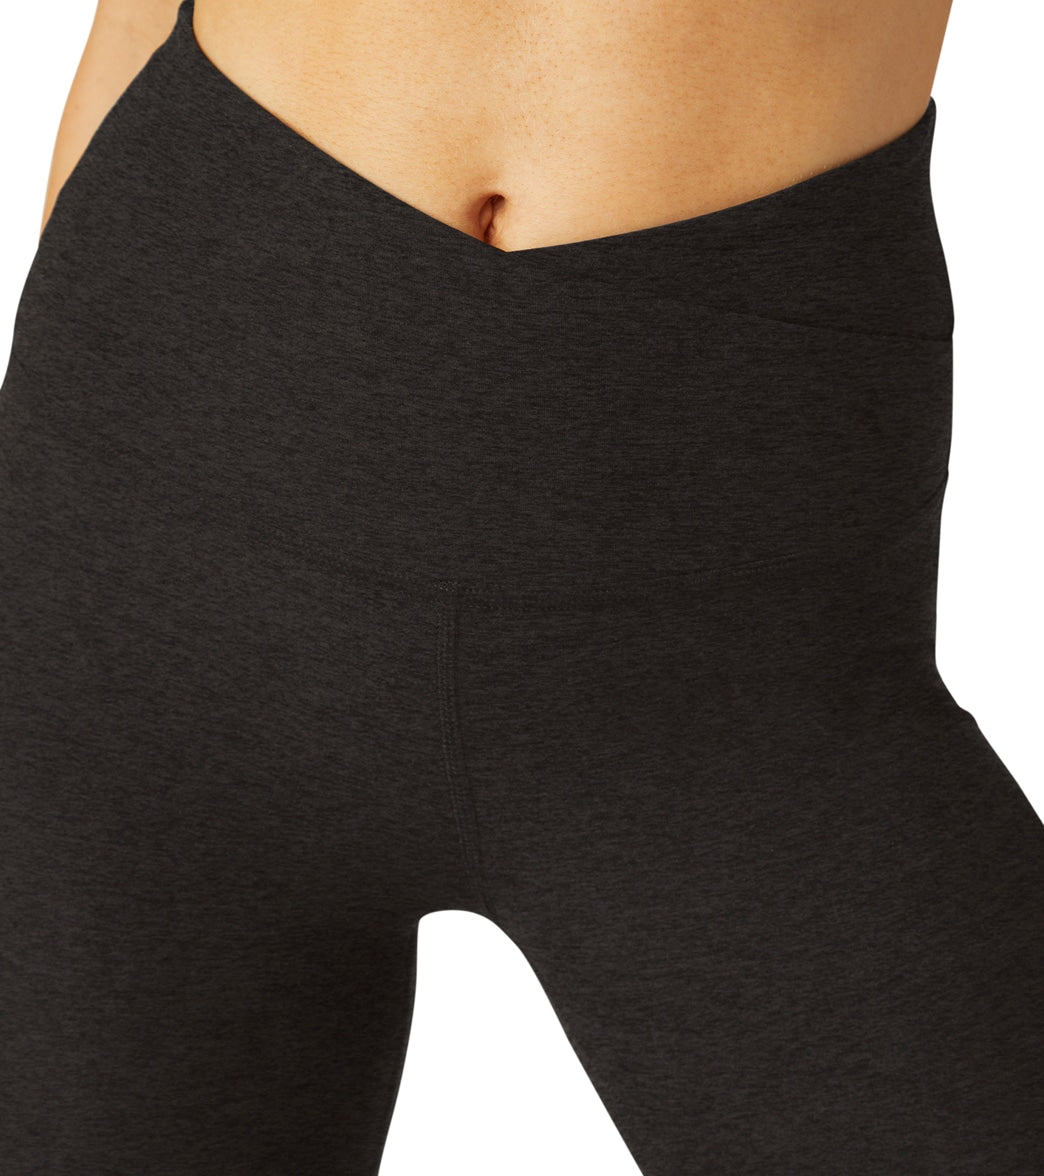 Beyond Yoga Spacedye At Your Leisure Bootcut Pant at  -  Free Shipping